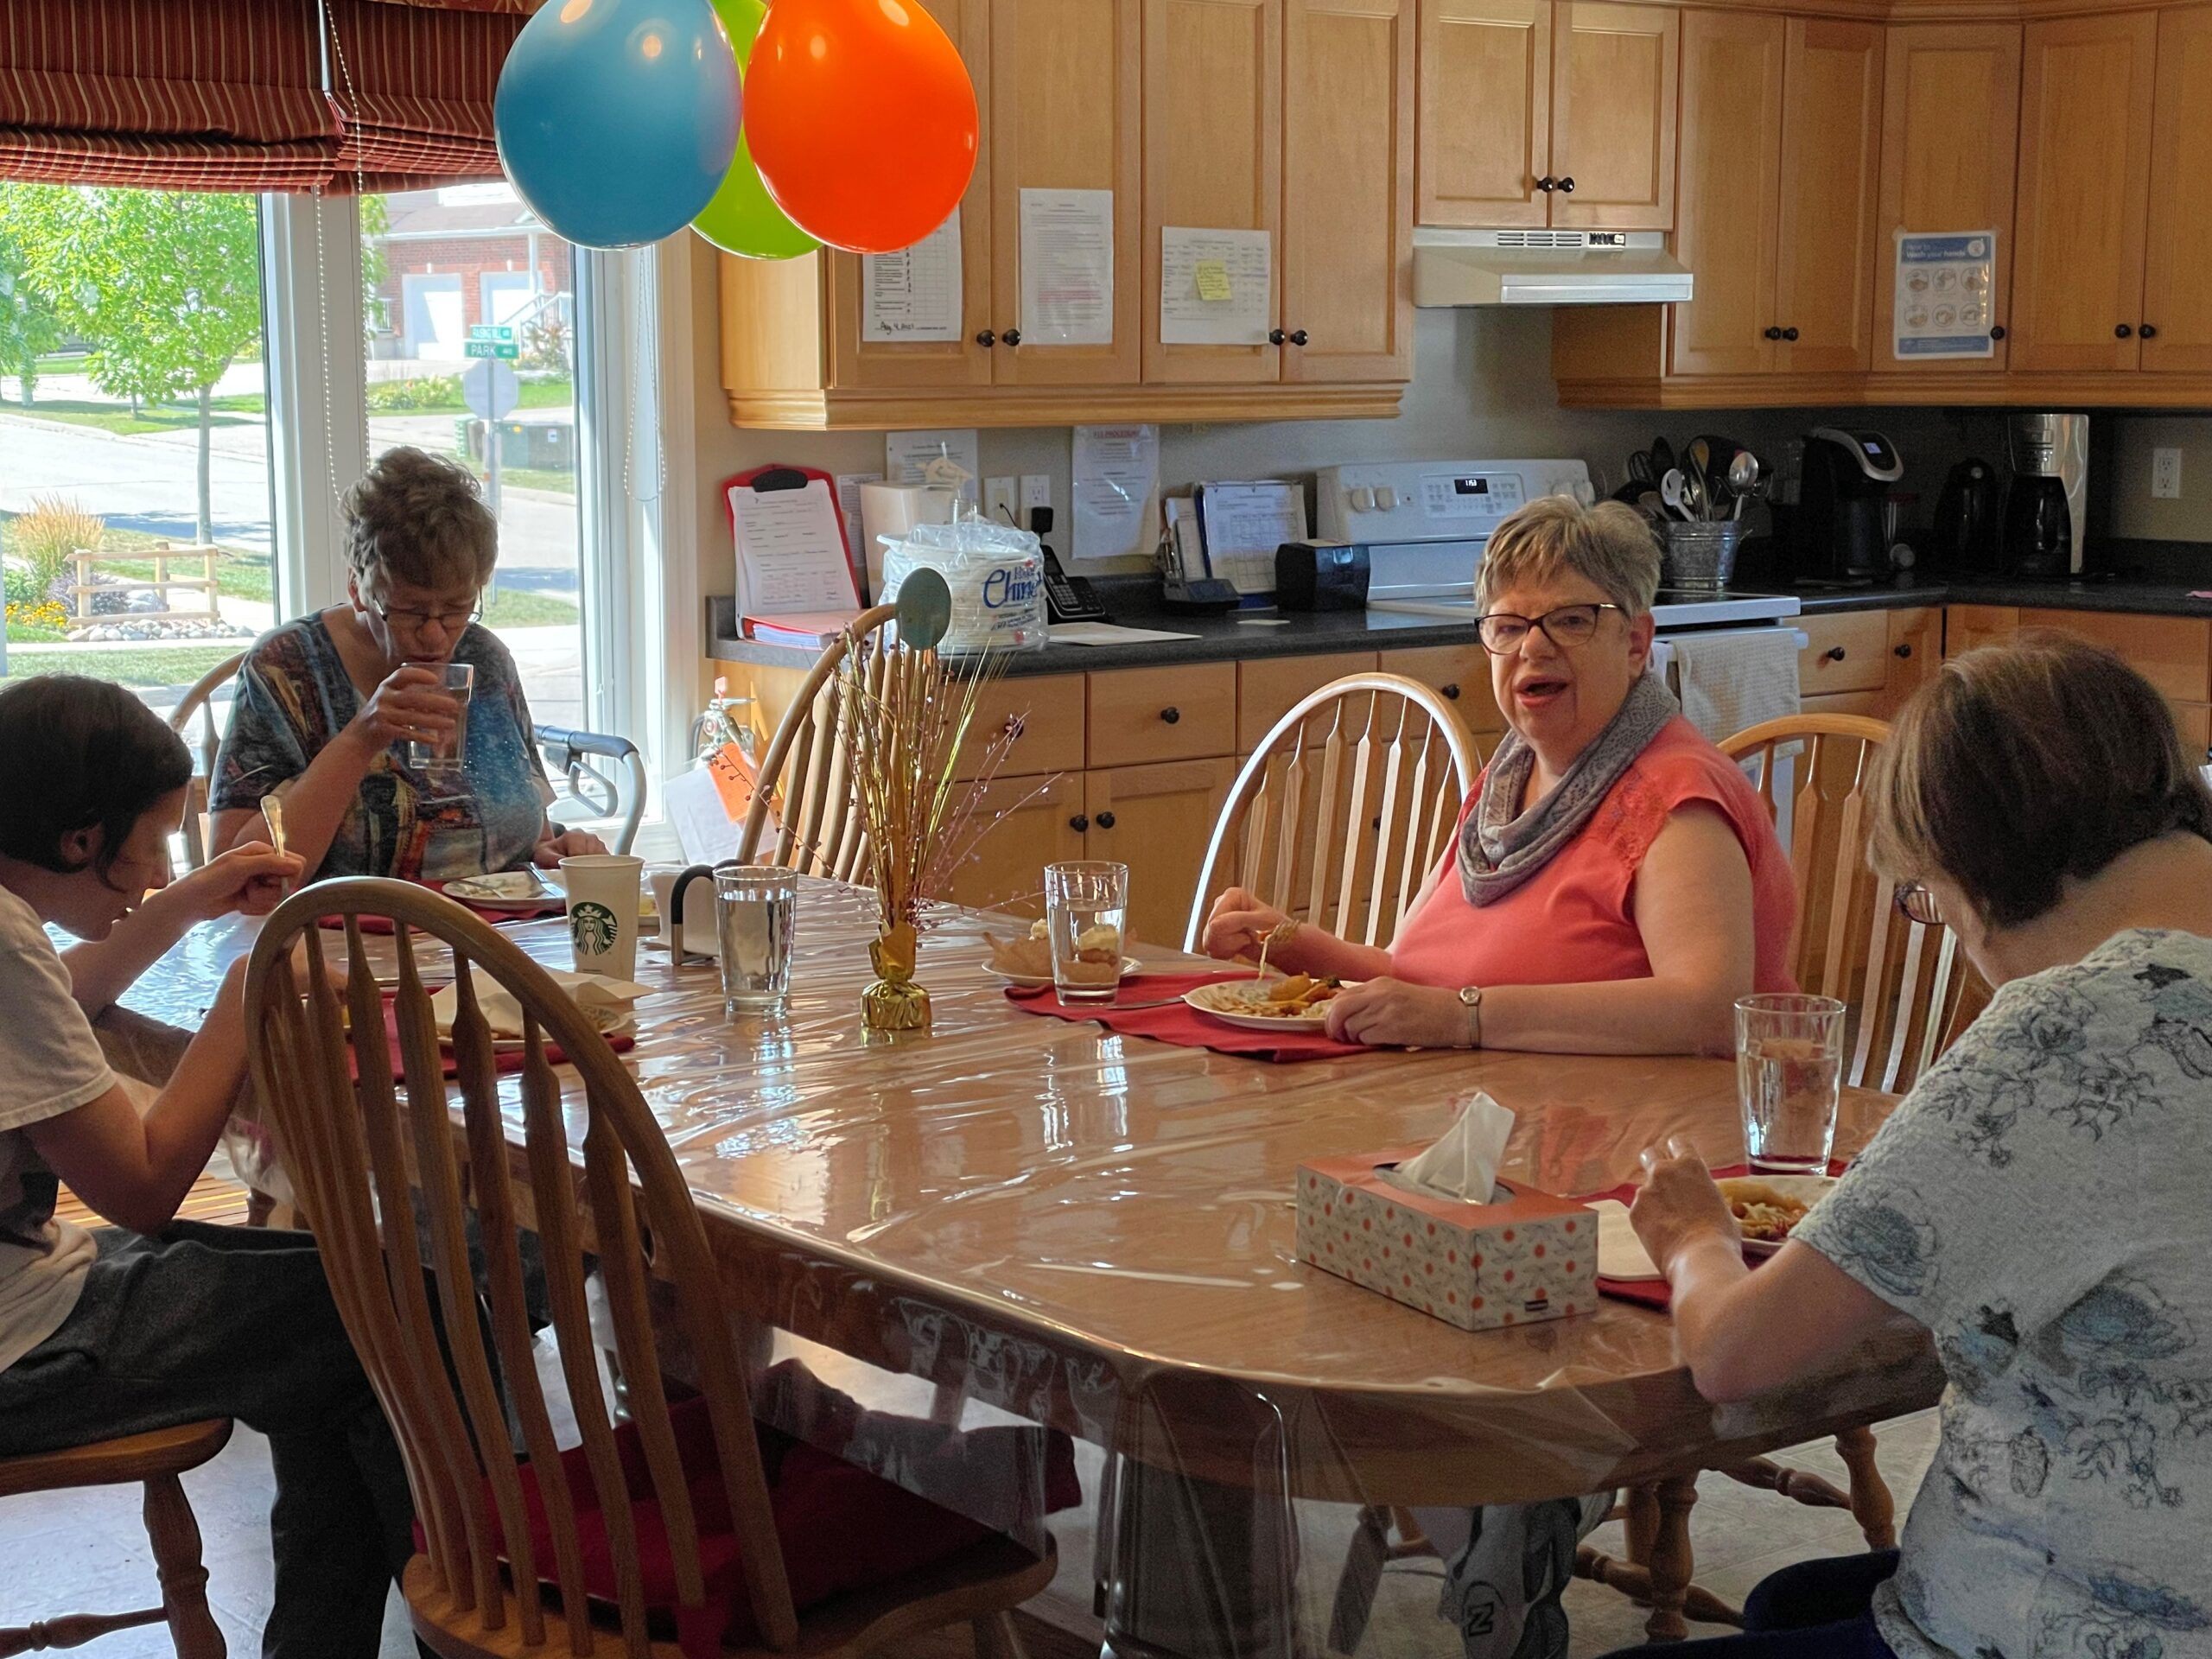 4 individuals sitting at a wooden table in a kitchen with balloons in the background